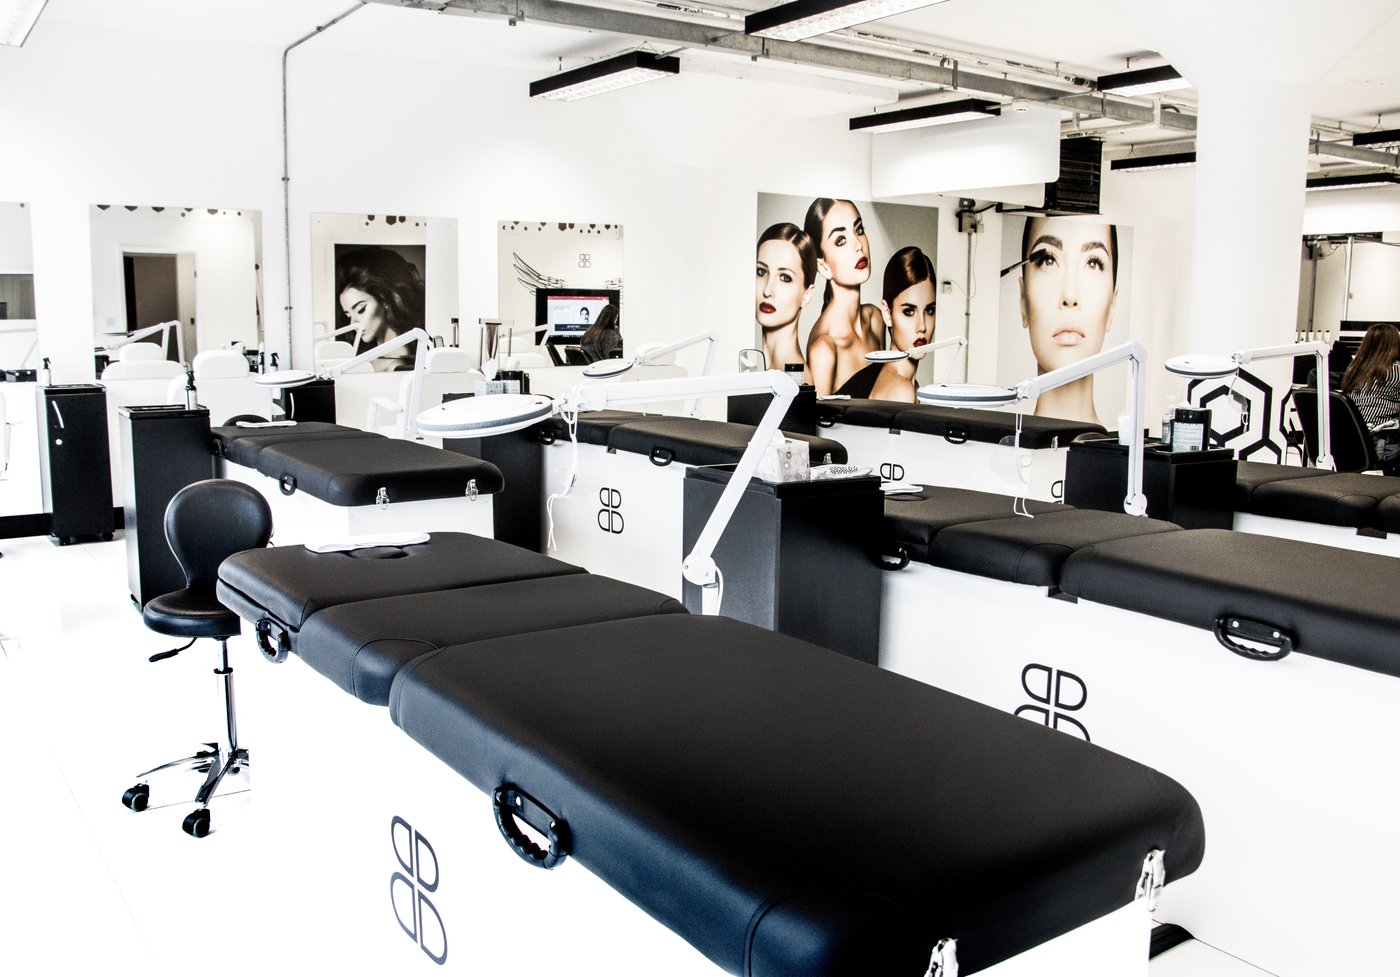 Brow Bomb Course - Liverpool HQ